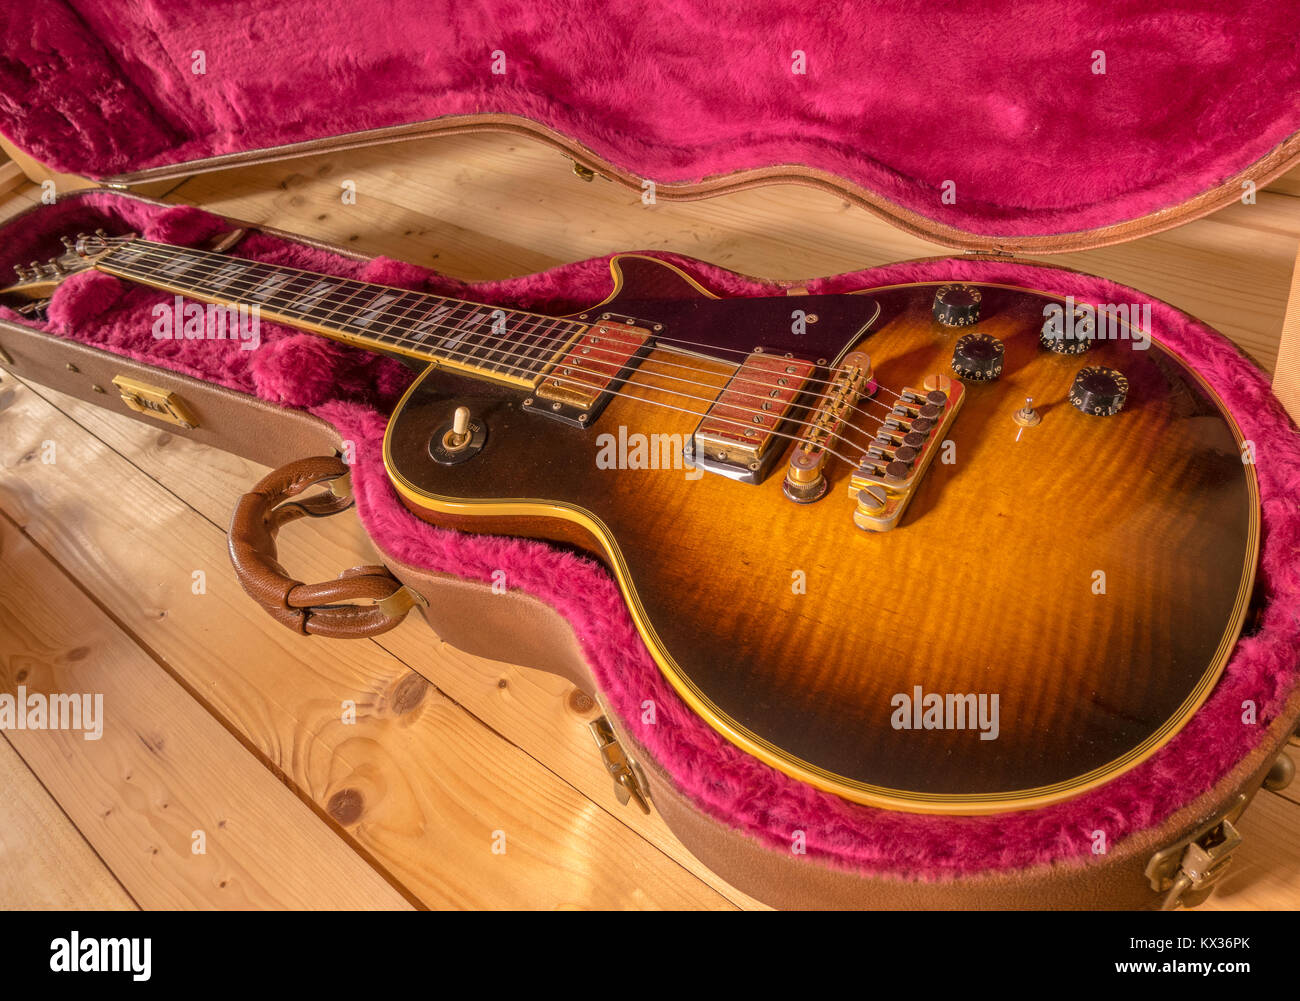 Gibson Les Paul vintage electric guitar, in shaped soft lined hard case. Antique sunburst 25/50 anniversary model, made in the USA, manufactured 1978. Stock Photo